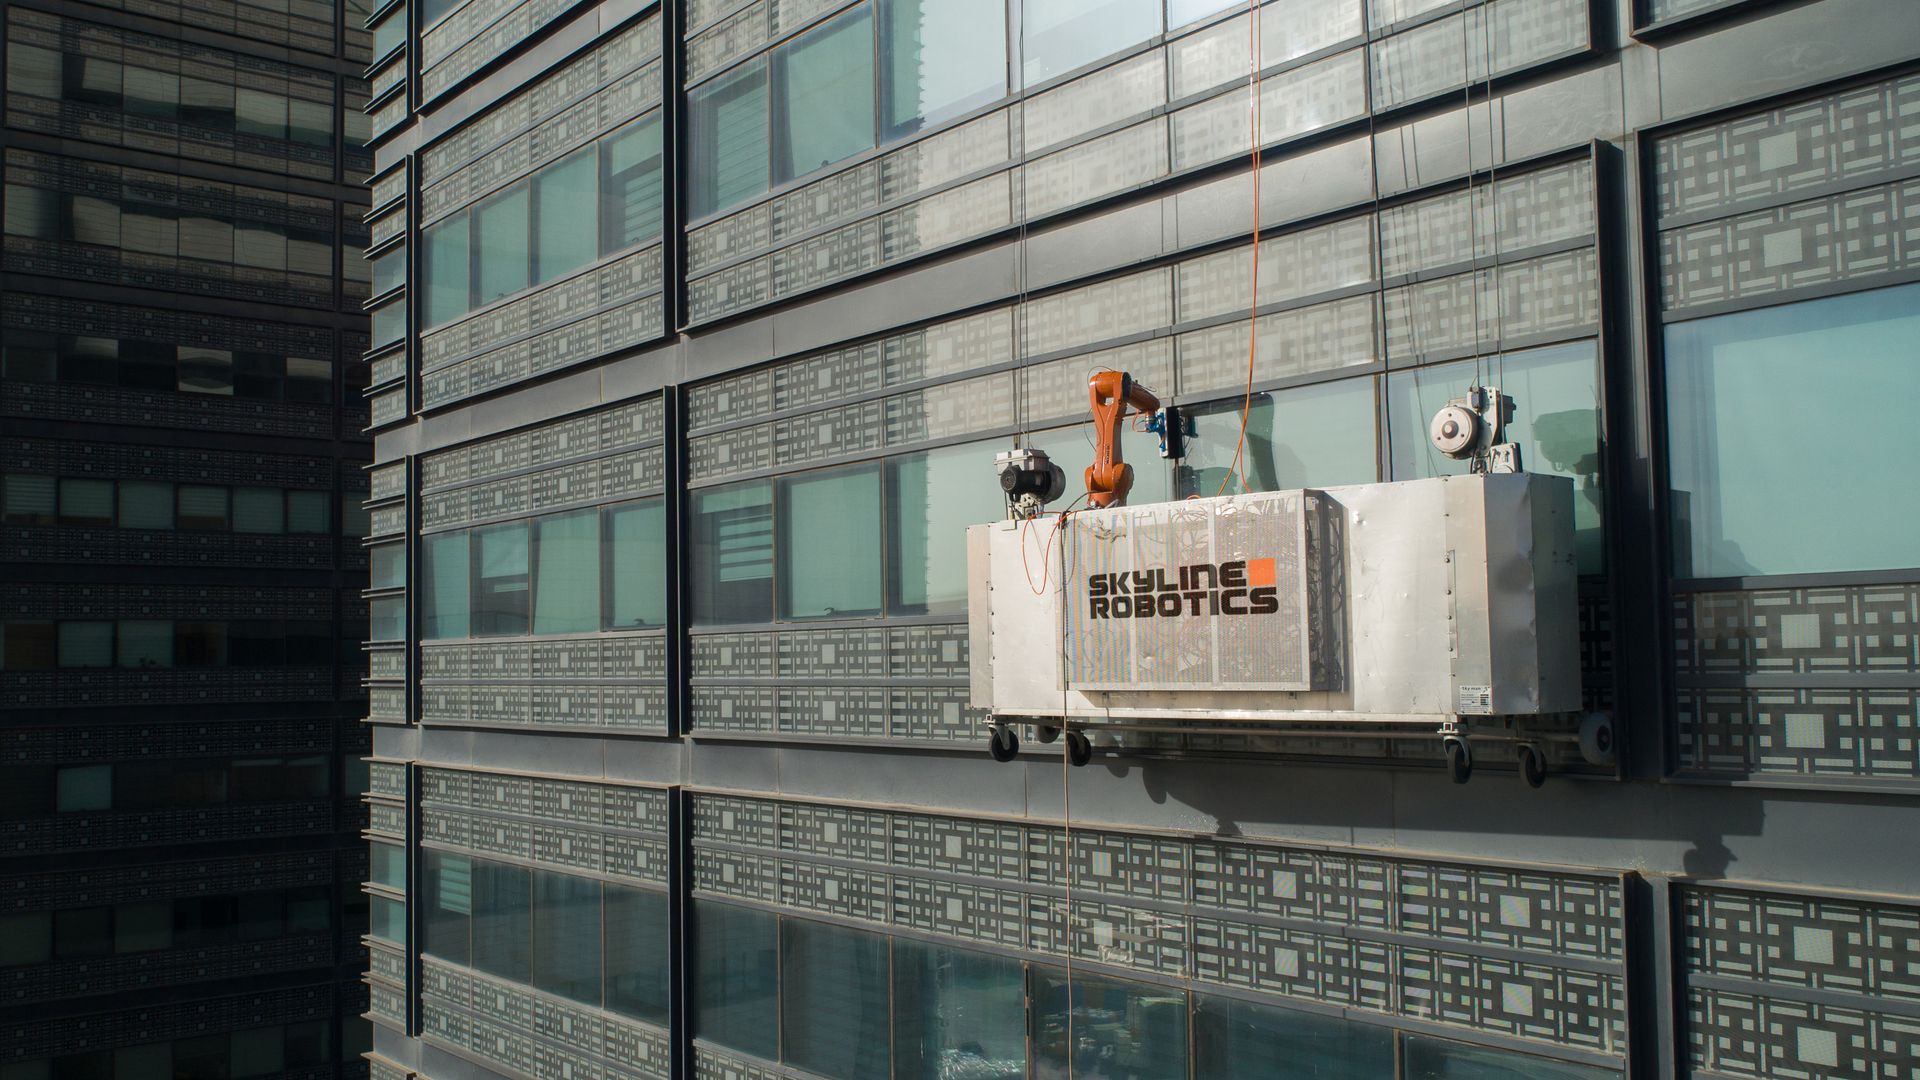 A window-washing basket on the side of a skyscraper with robots instead of humans in it.